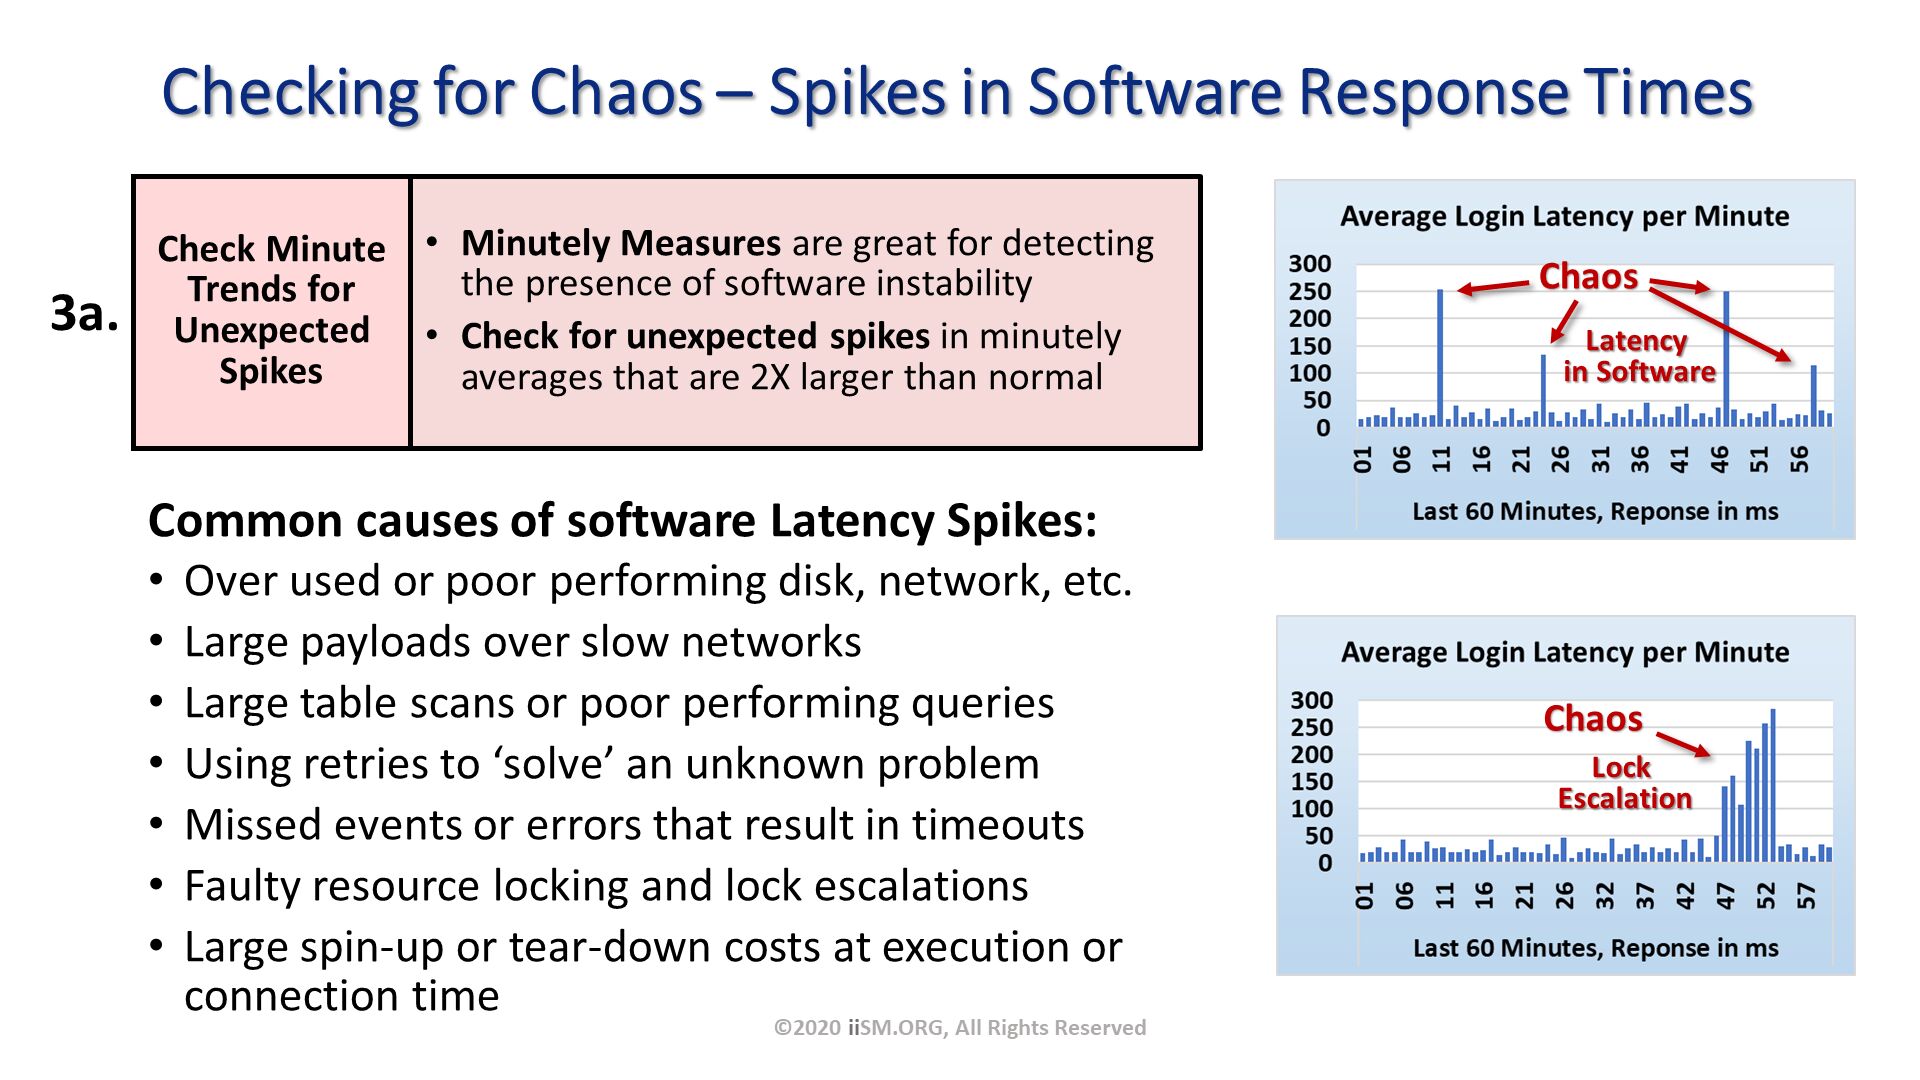 Checking for Chaos – Spikes in Software Response Times. ©2020 iiSM.ORG, All Rights Reserved. Check Minute Trends for Unexpected Spikes. 3a. Minutely Measures are great for detecting the presence of software instability
Check for unexpected spikes in minutely averages that are 2X larger than normal. Common causes of software Latency Spikes:
Over used or poor performing disk, network, etc.
Large payloads over slow networks
Large table scans or poor performing queries
Using retries to ‘solve’ an unknown problem
Missed events or errors that result in timeouts
Faulty resource locking and lock escalations
Large spin-up or tear-down costs at execution or connection time. 